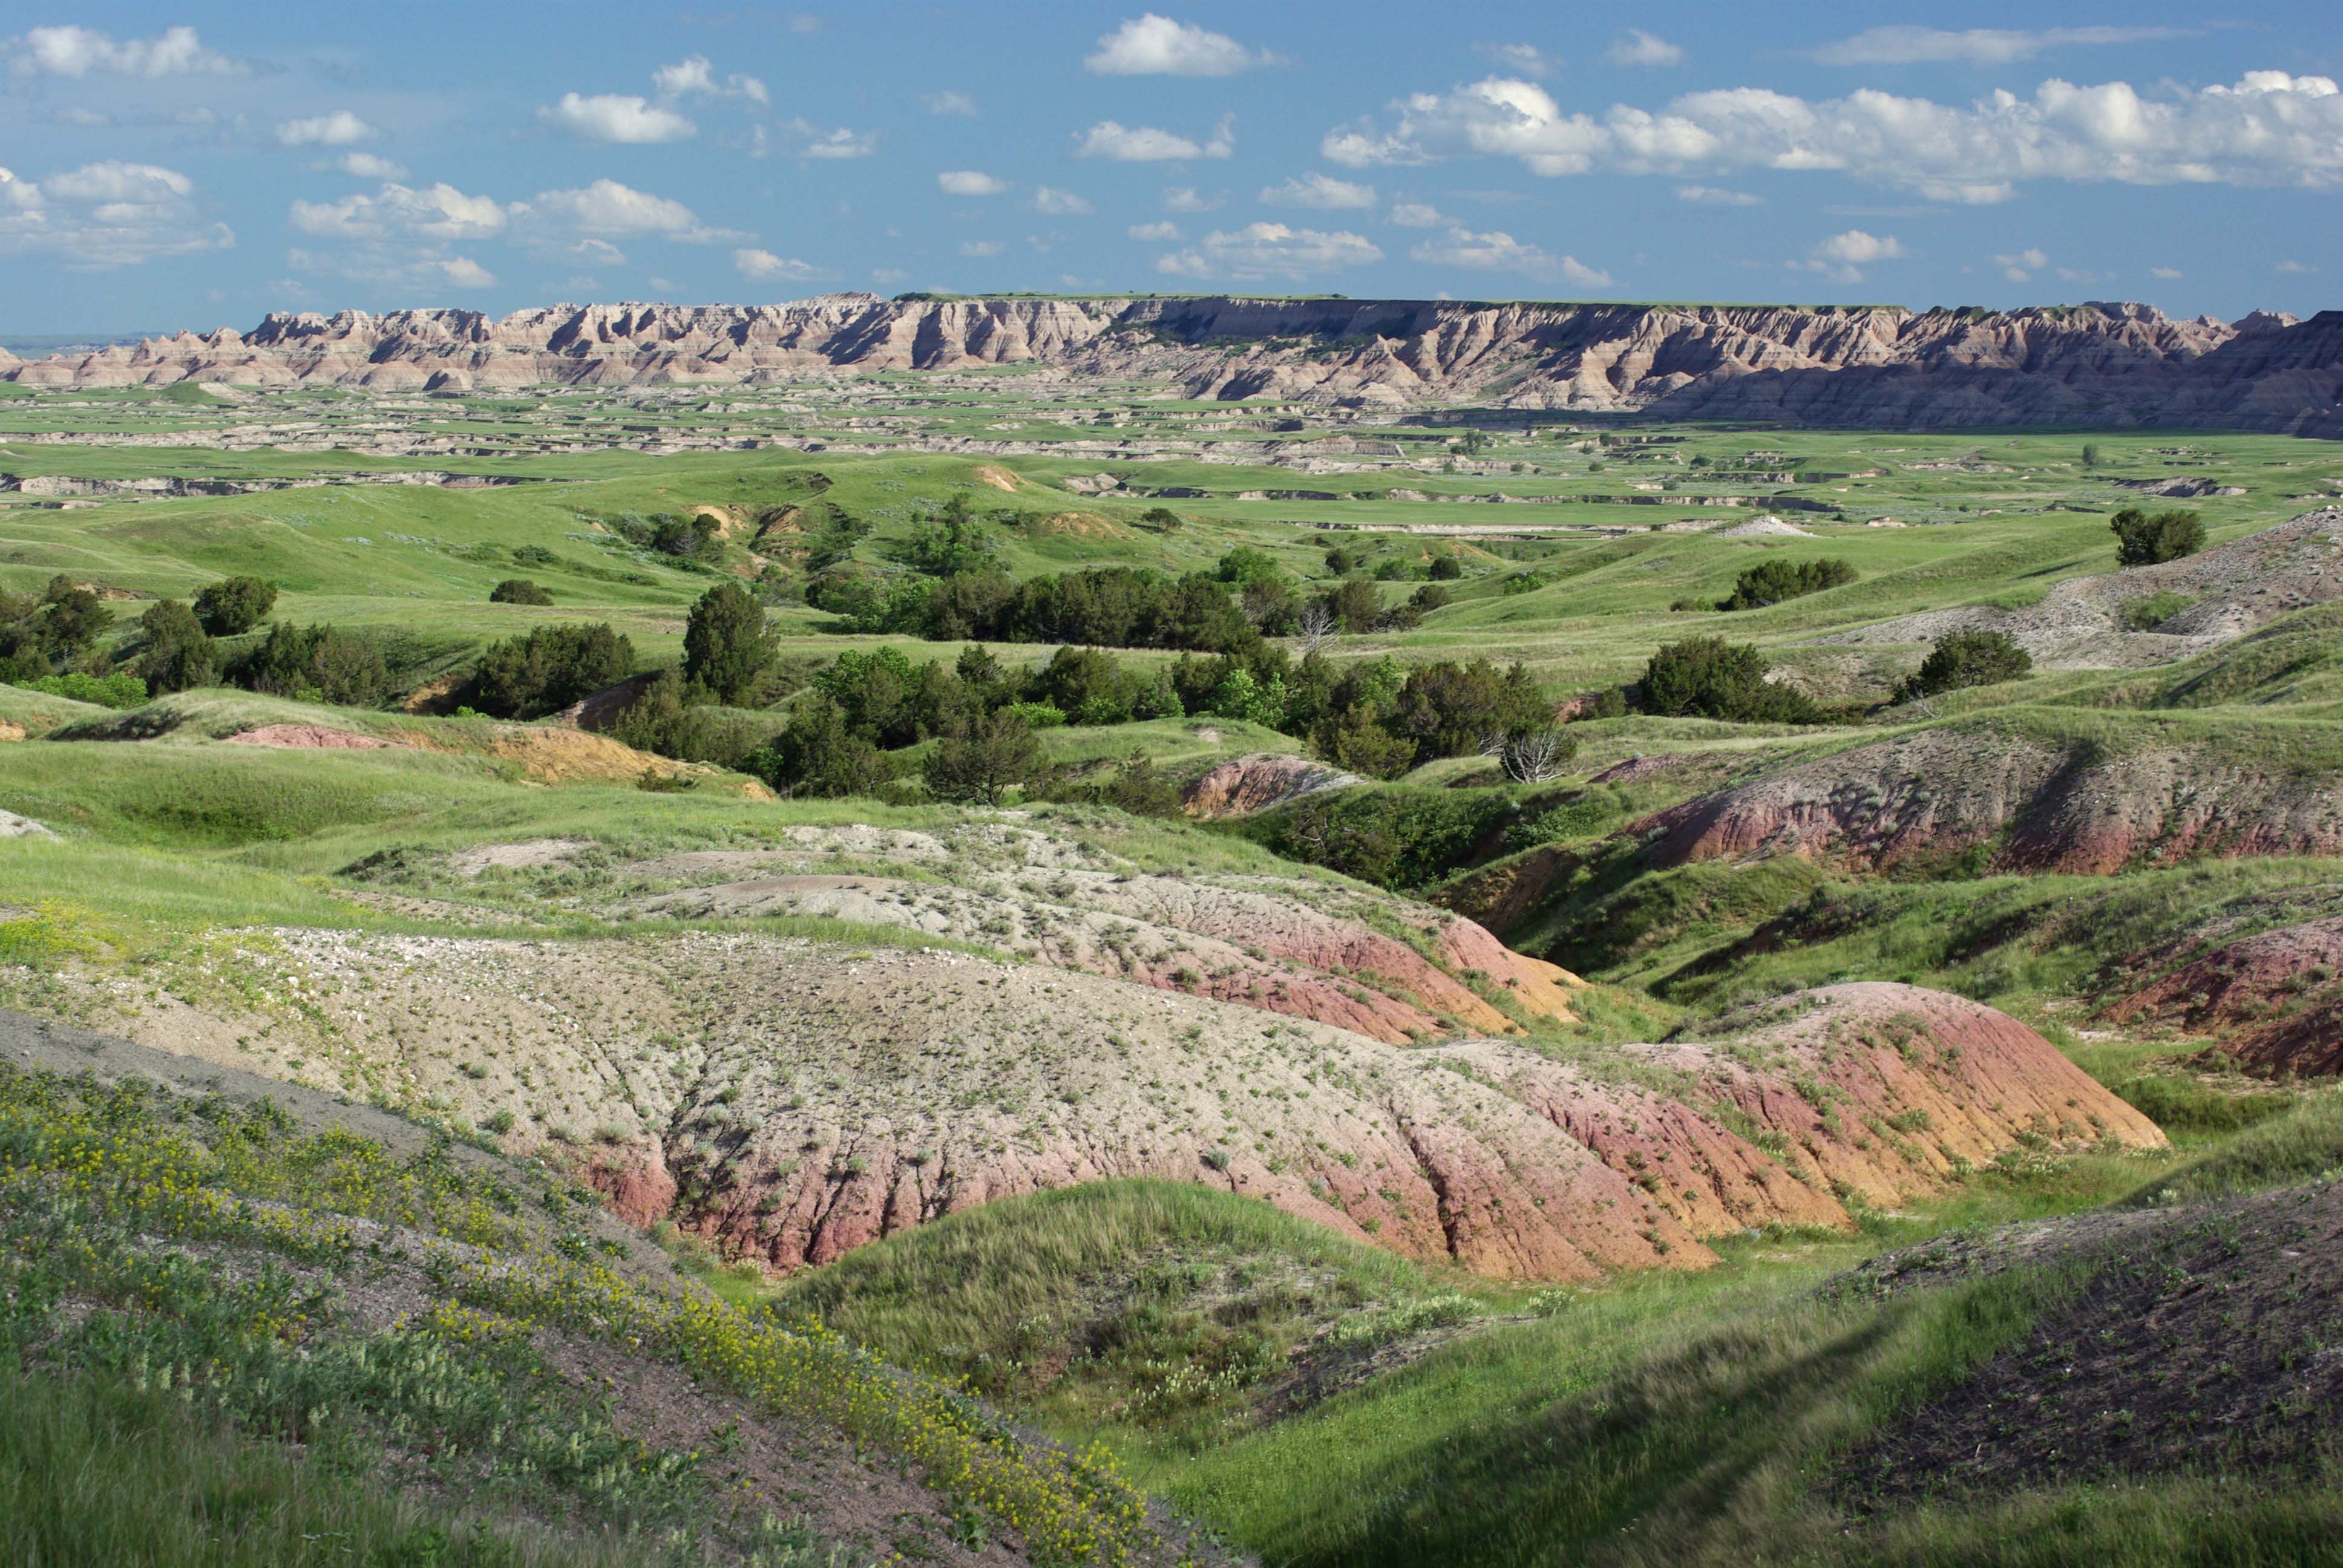 The yellow mounds are peaking out of the formations in this photo.